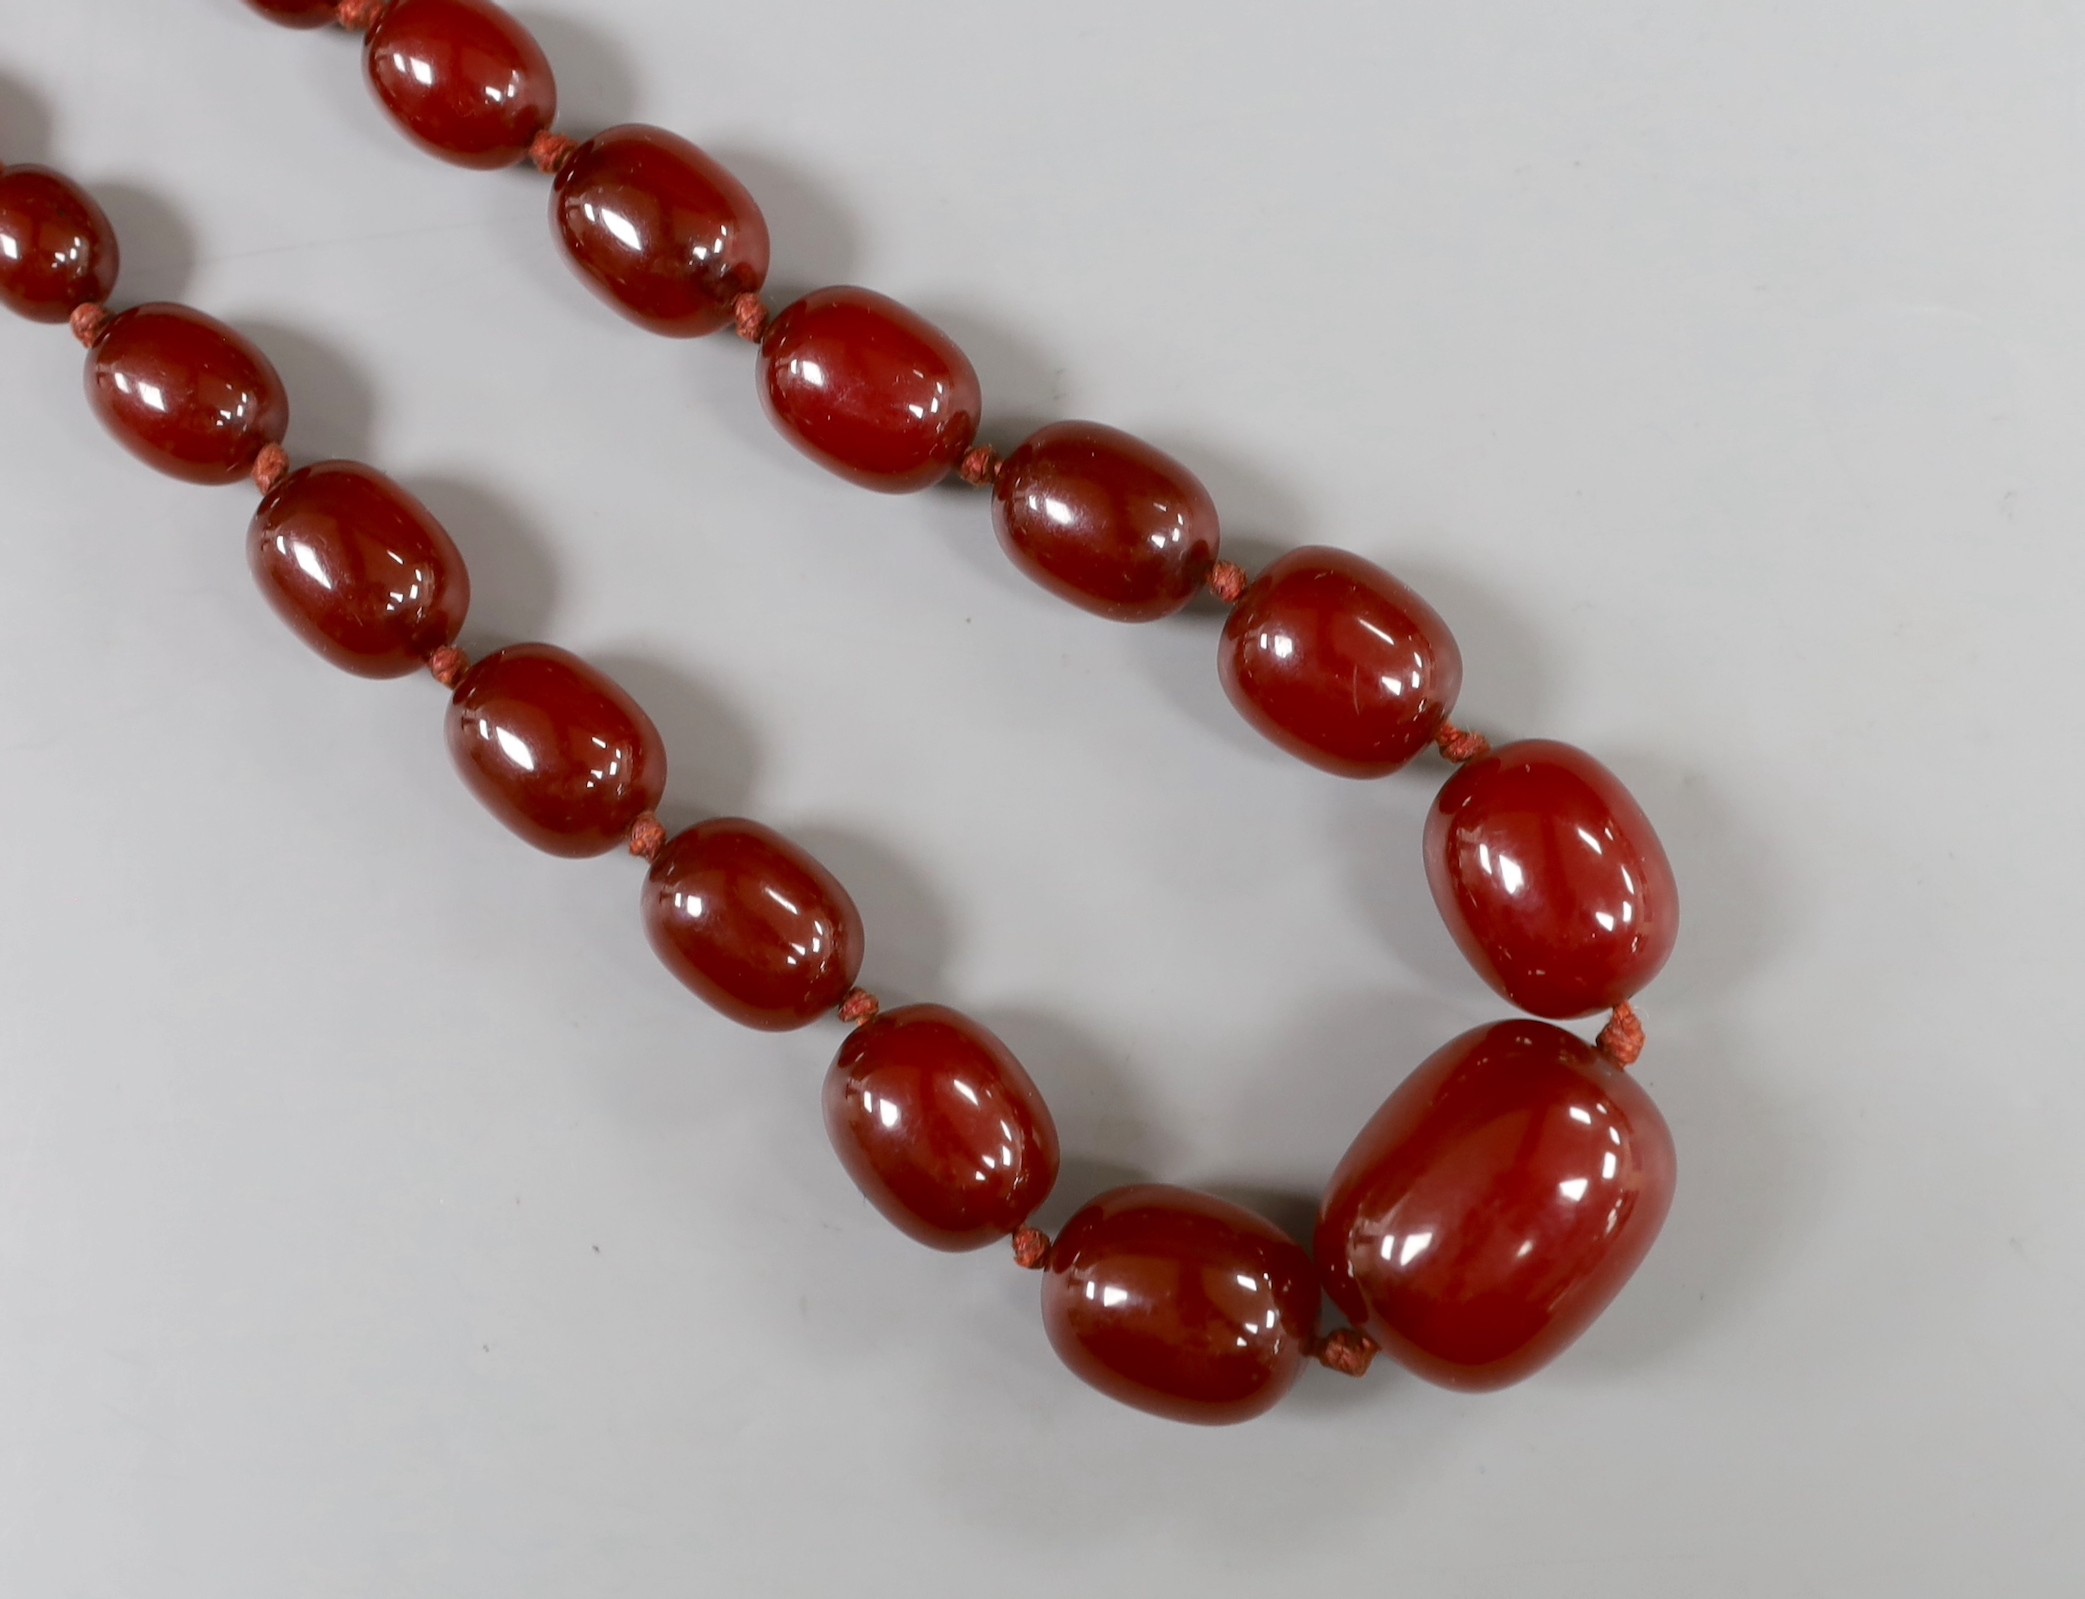 A single strand graduated oval simulated cherry amber bead necklace, 56cm, gross weight 75 grams.